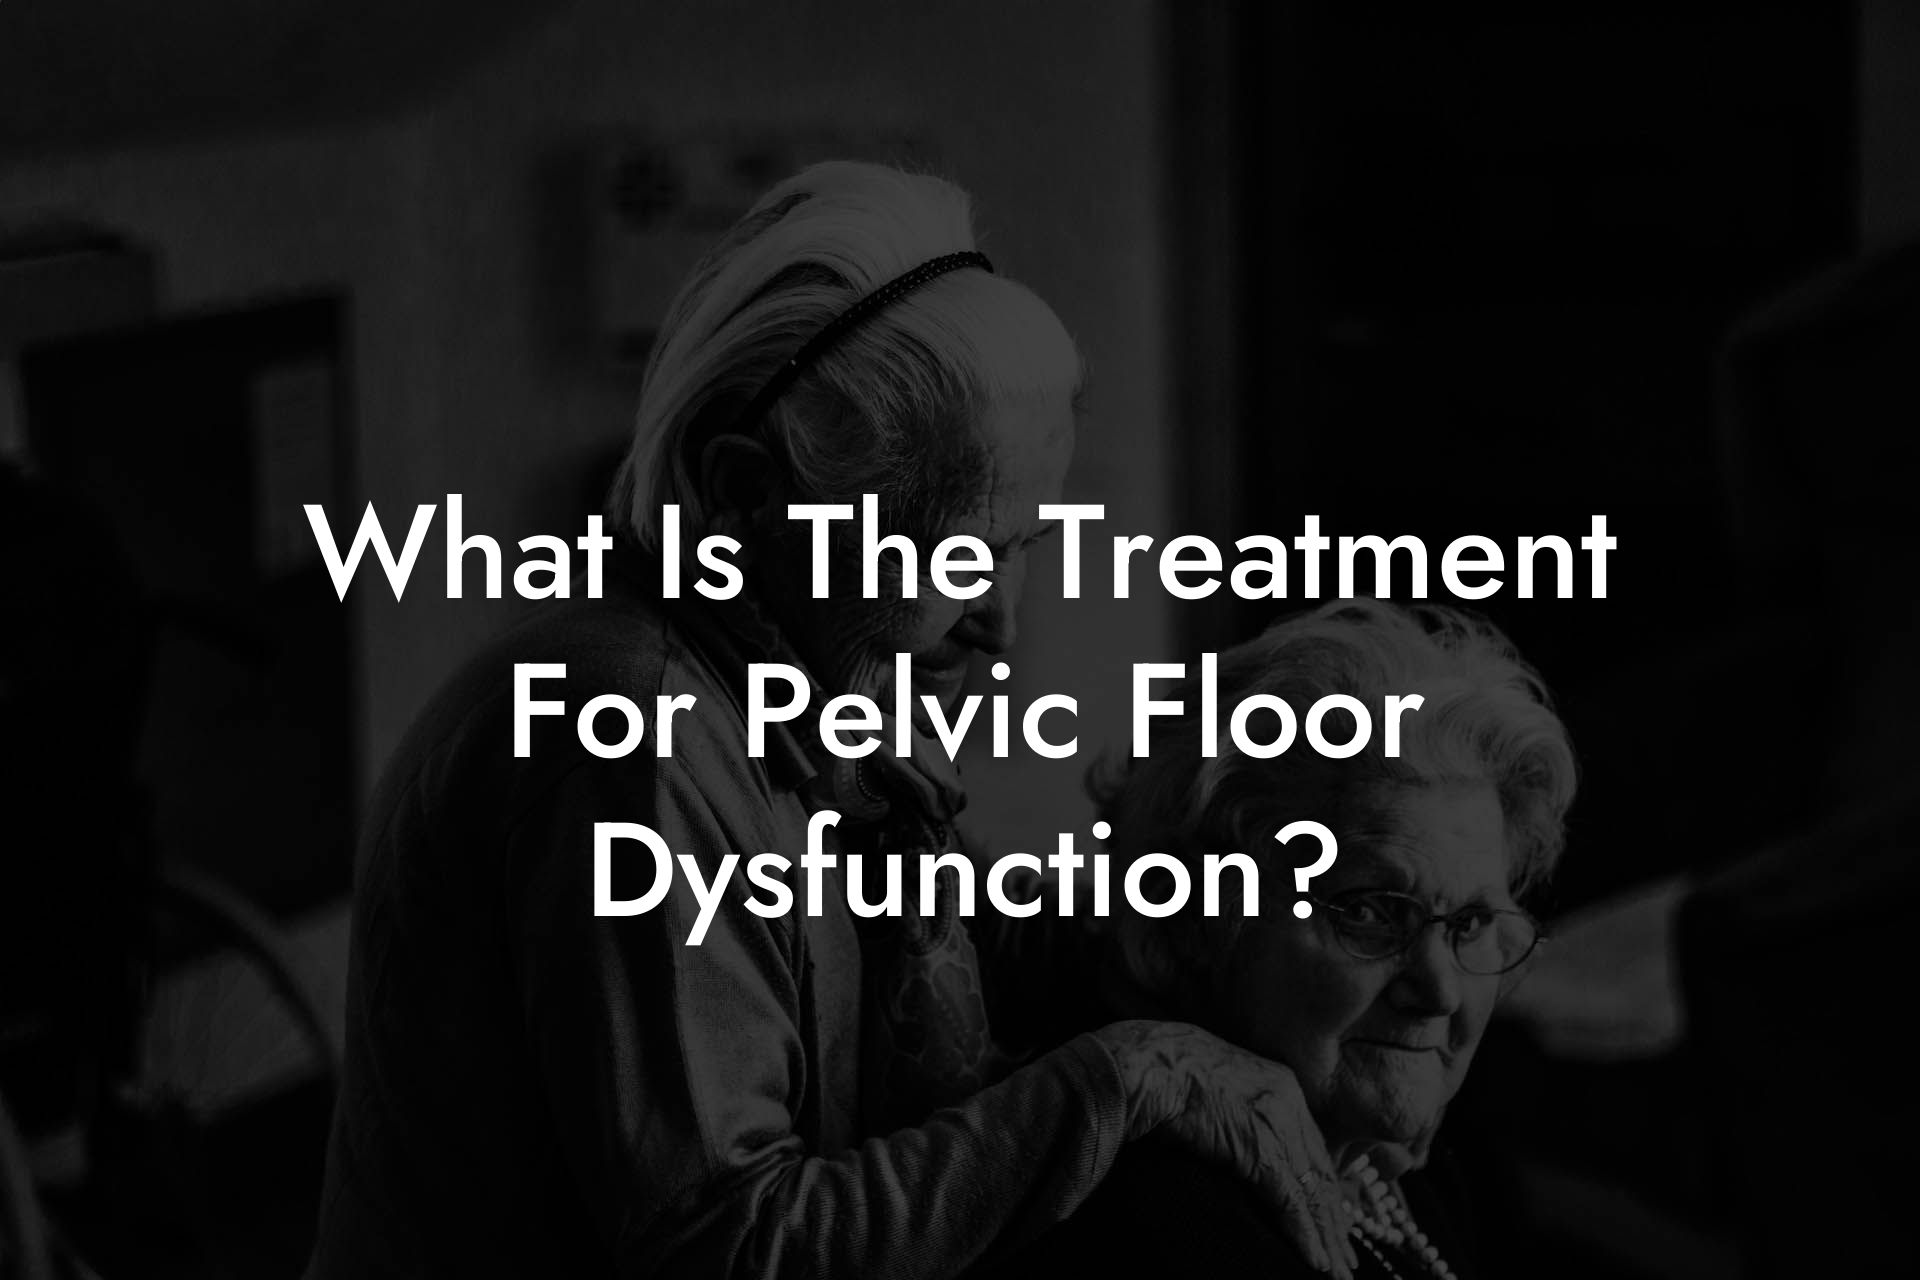 What Is The Treatment For Pelvic Floor Dysfunction?